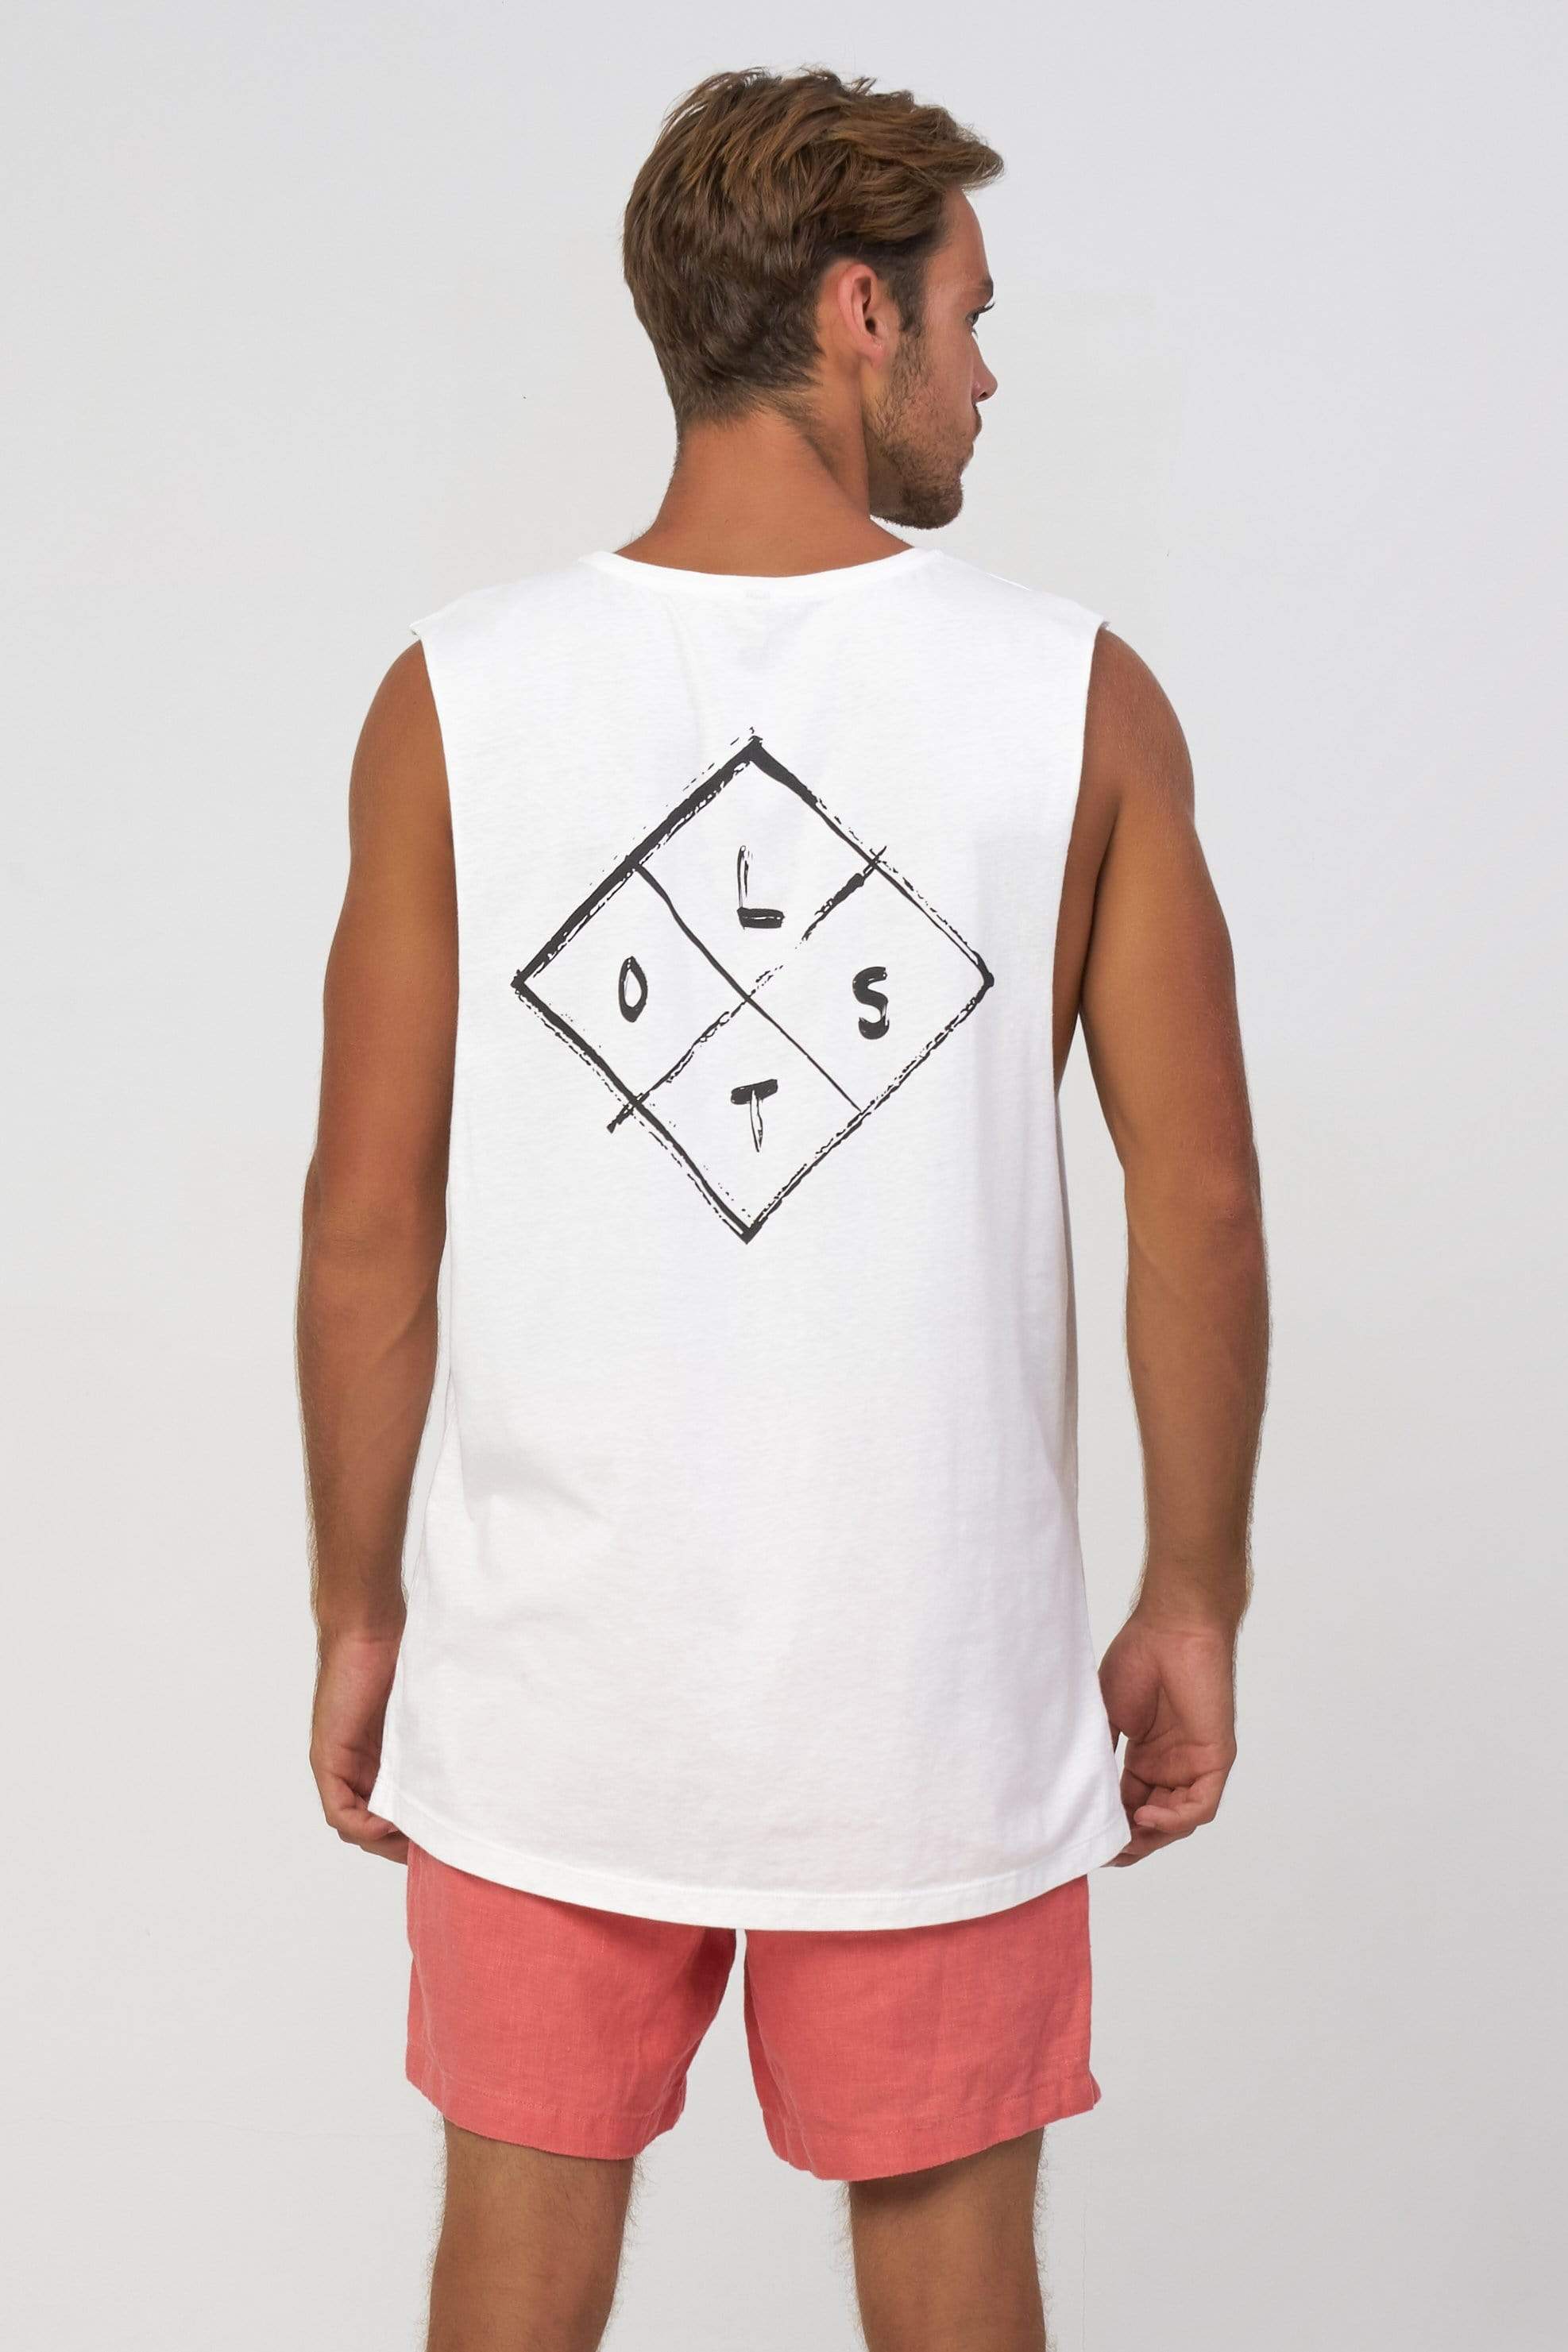 Sm Lost Diamond - Mens Muscle Tank - LOST IN PARADISE